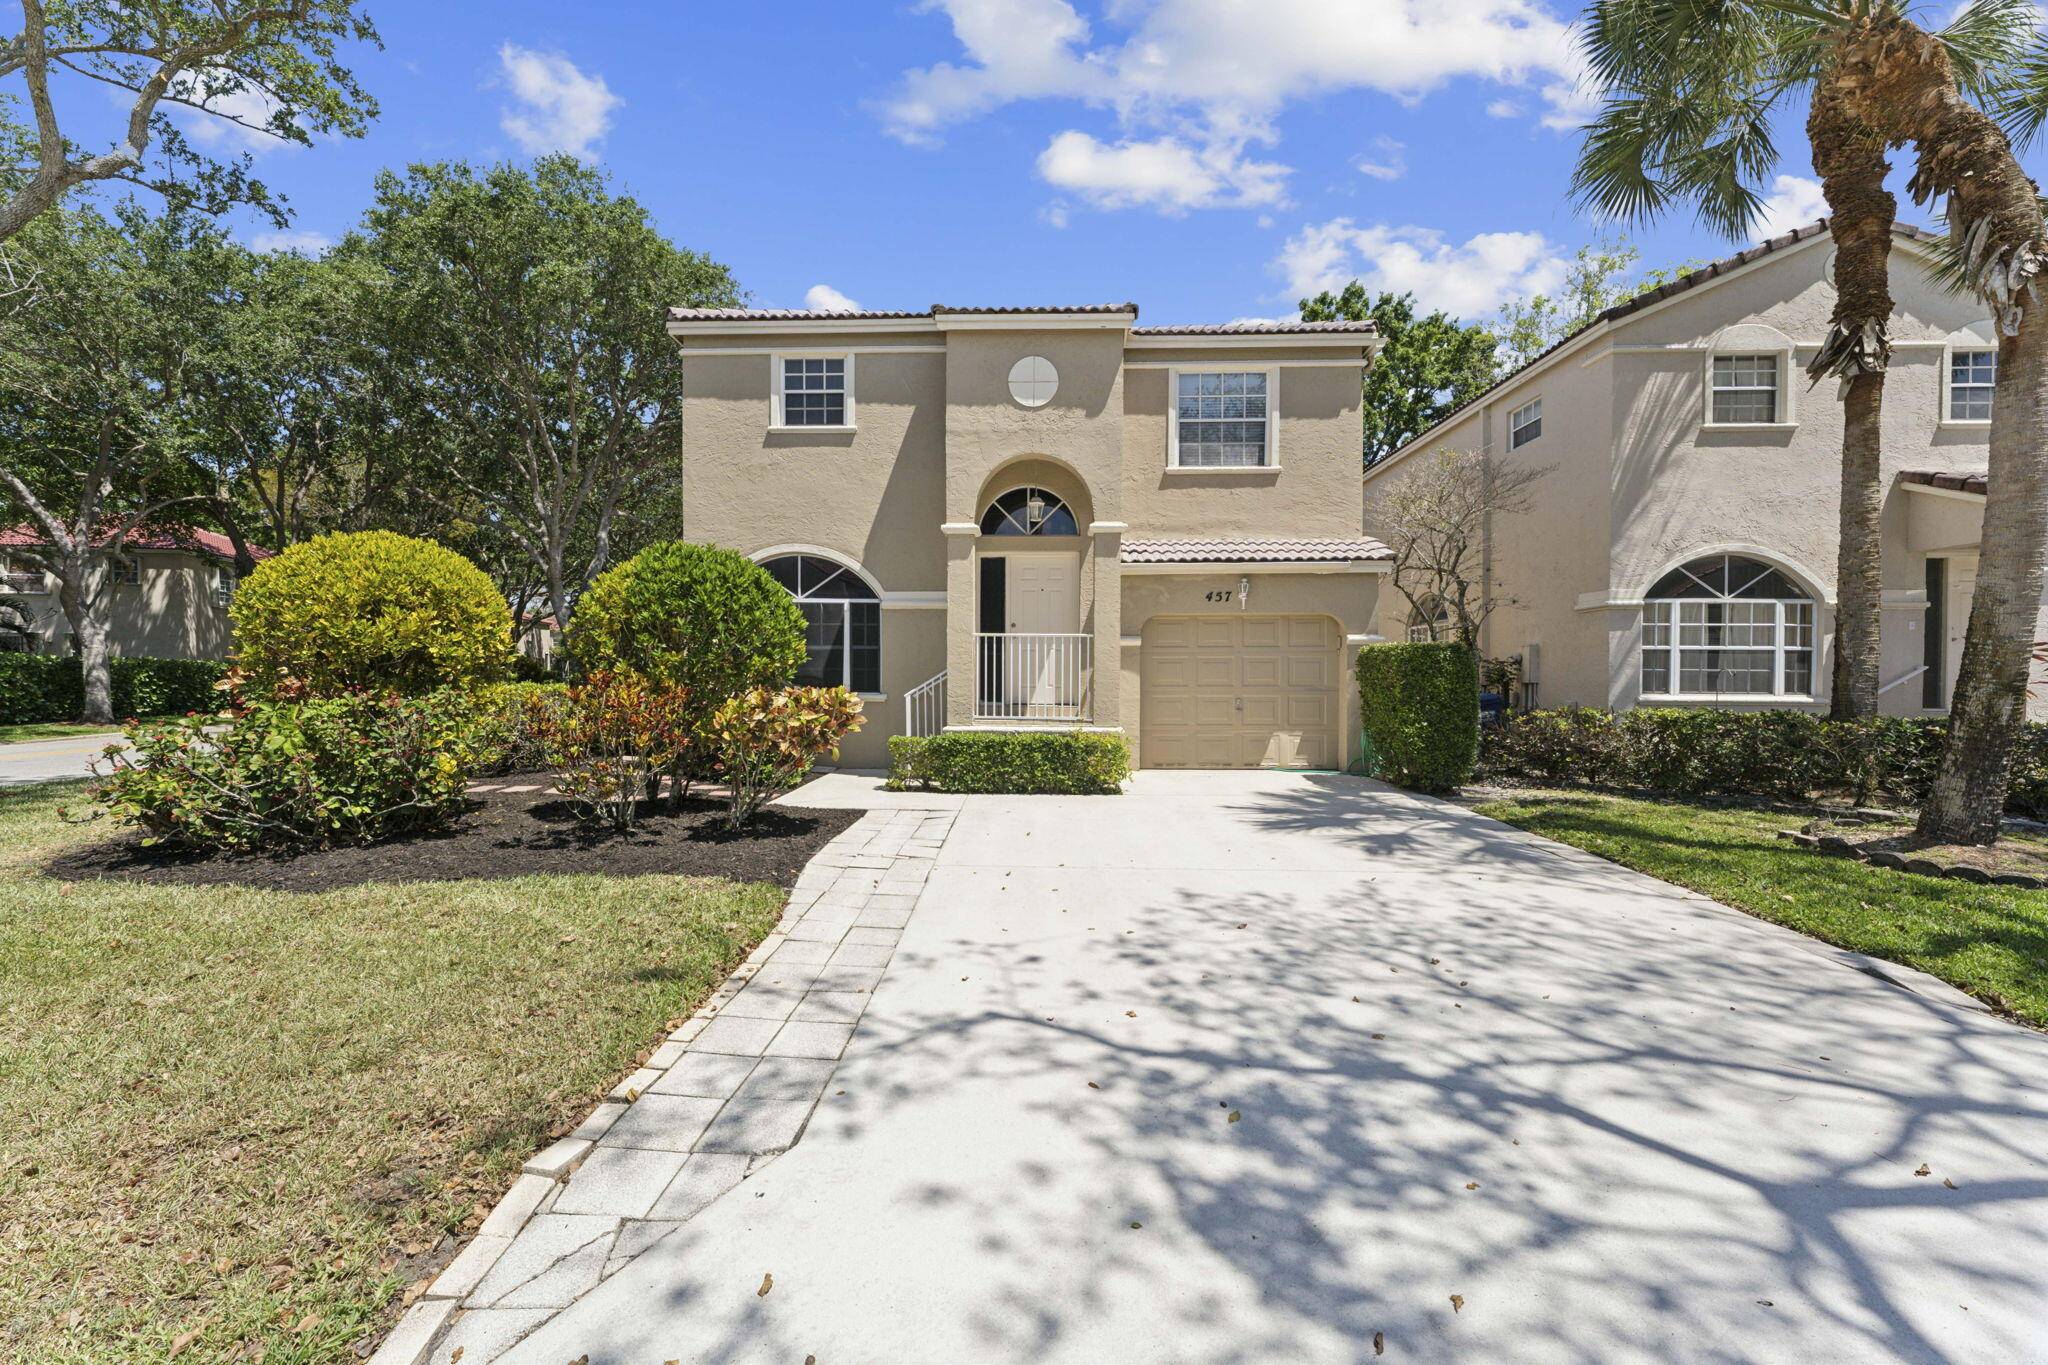 Introducing this charming single family home nestled in the coveted neighborhood of Governors Walk in Coral Springs.